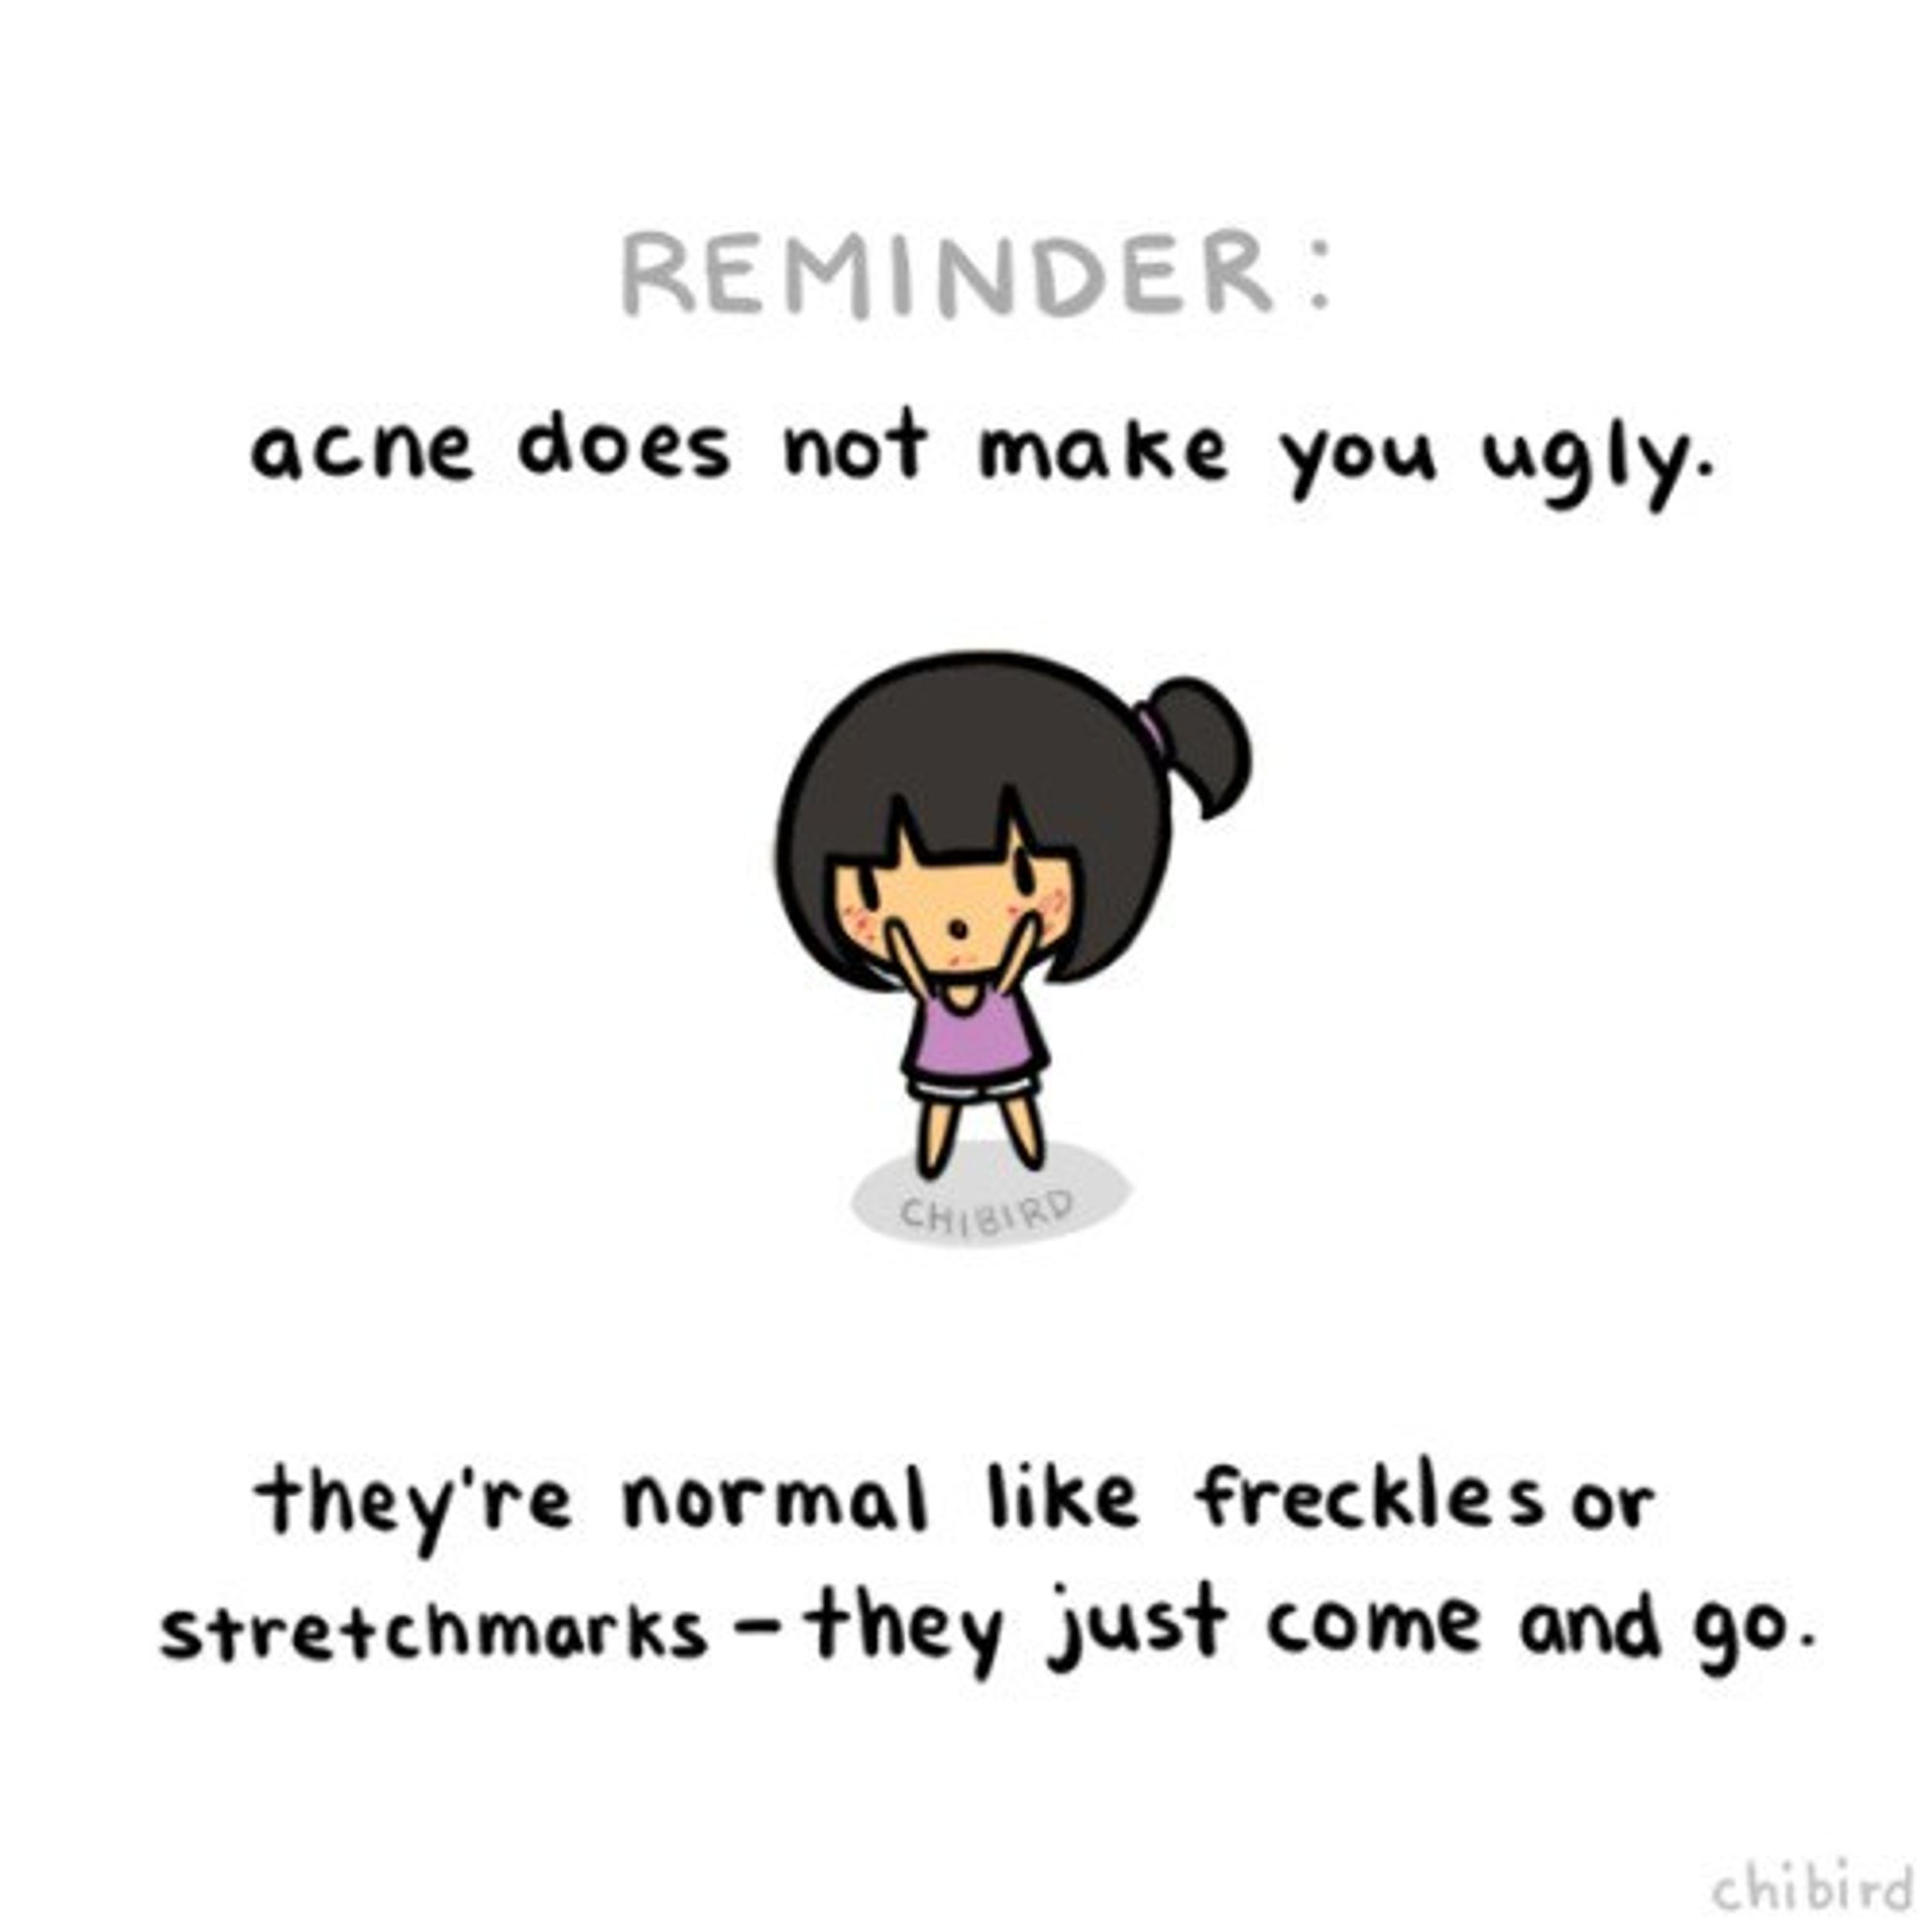 Why You Shouldn't Make Fun Of Someone With Acne